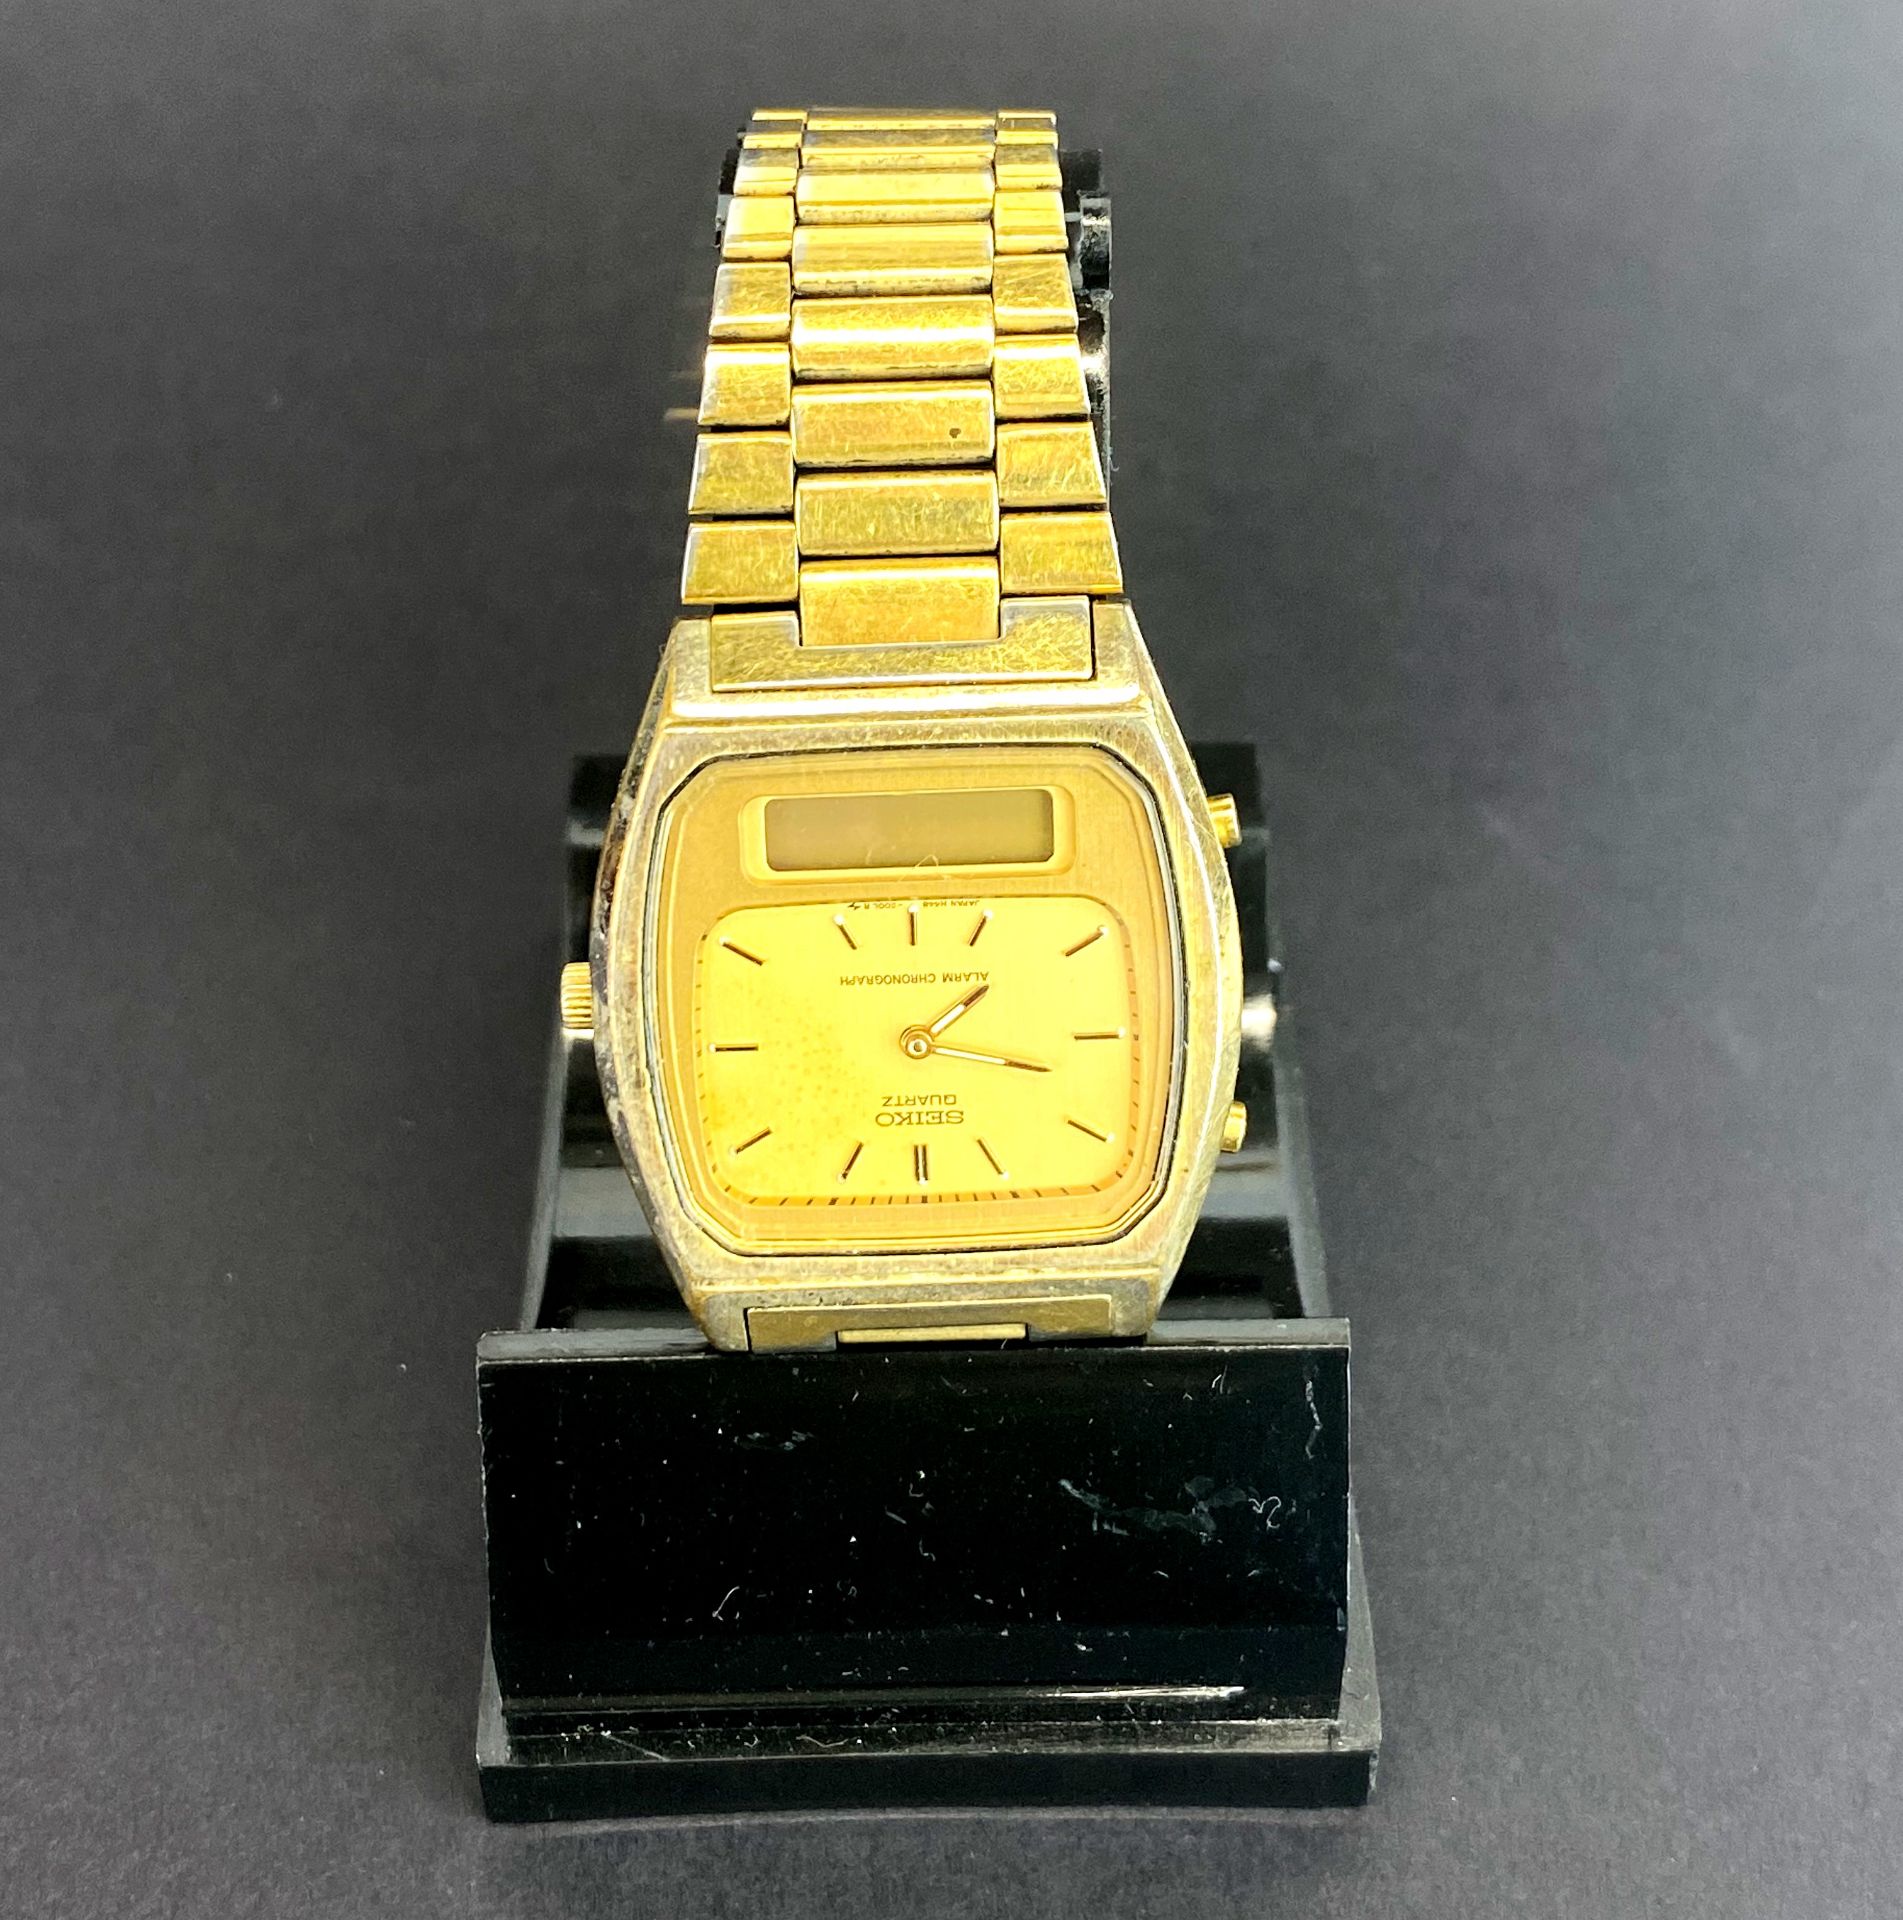 A gents vintage Seiko gold plated wristwatch.